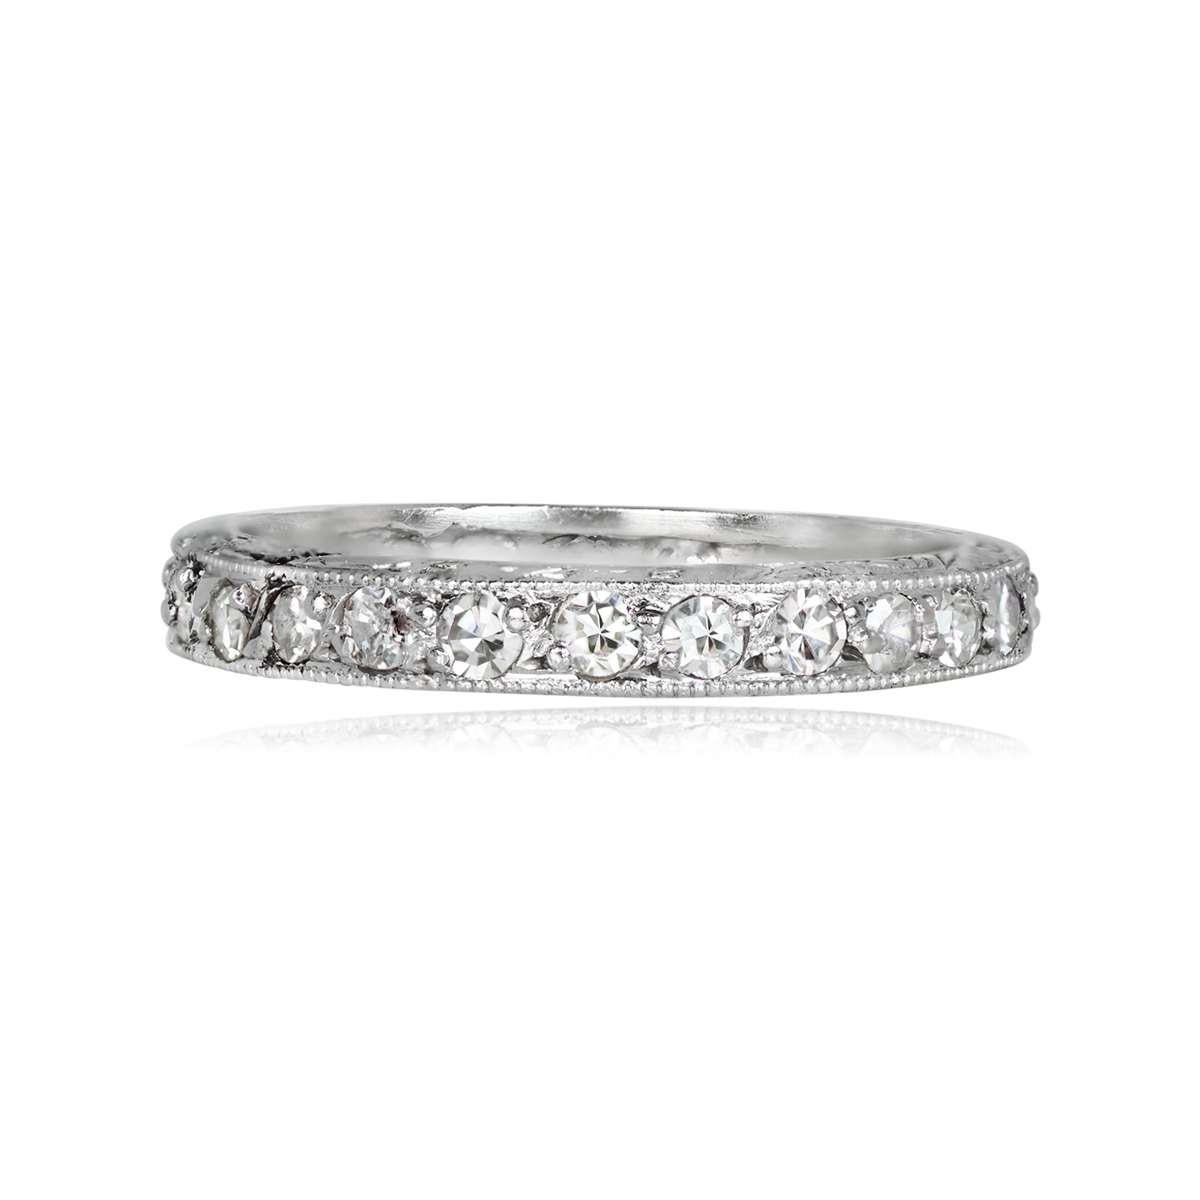 A vintage platinum eternity band showcasing about 0.58 carats of J-K color, VS2 clarity single-cut diamonds. The band features channel-setting and intricate hand engravings along the side. Handcrafted circa 1955.

Ring Size: 6.5 US, Resizable
Color: